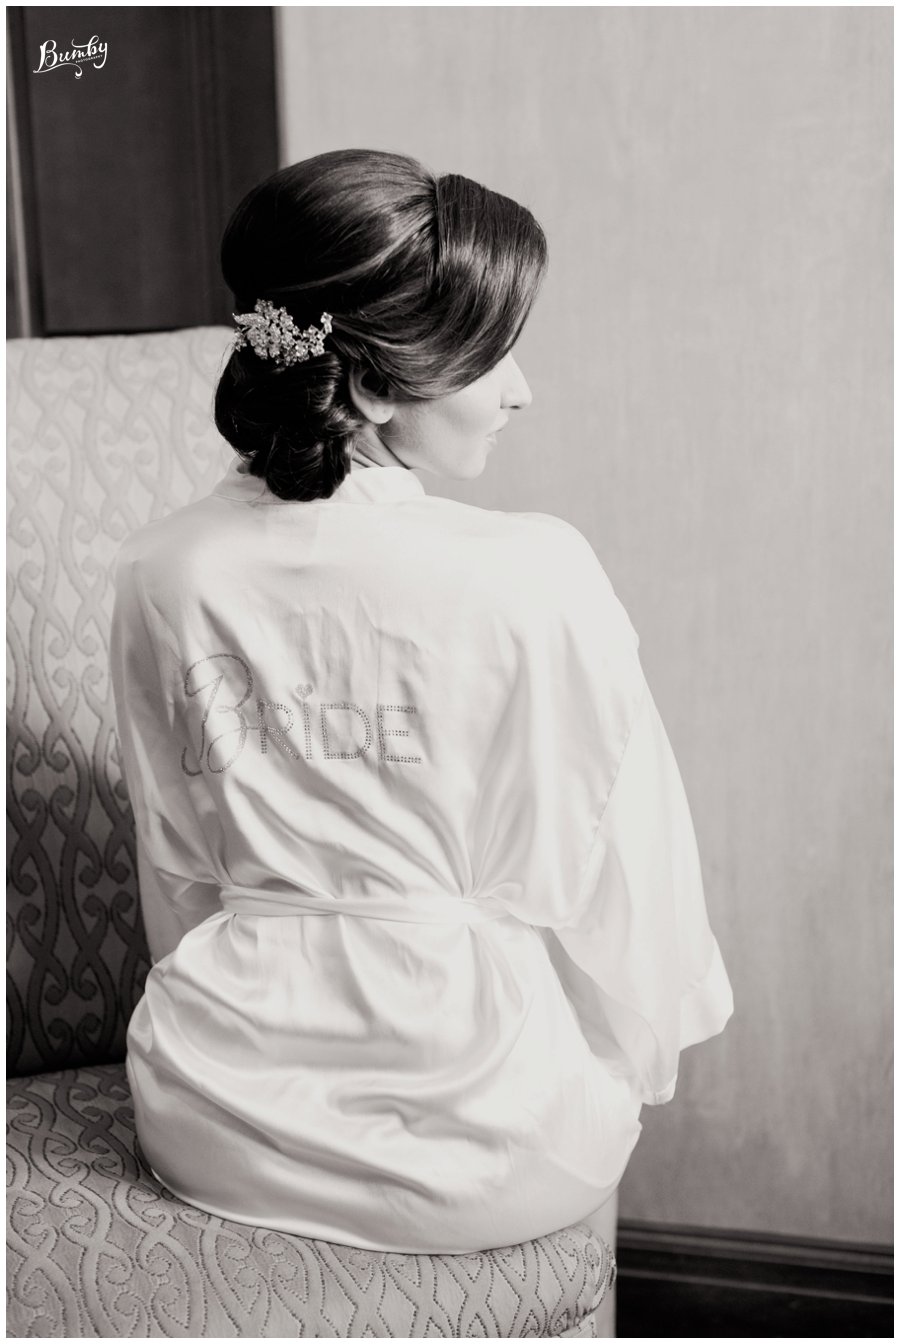 Black and white photo of the bride's updo hairstyle. 